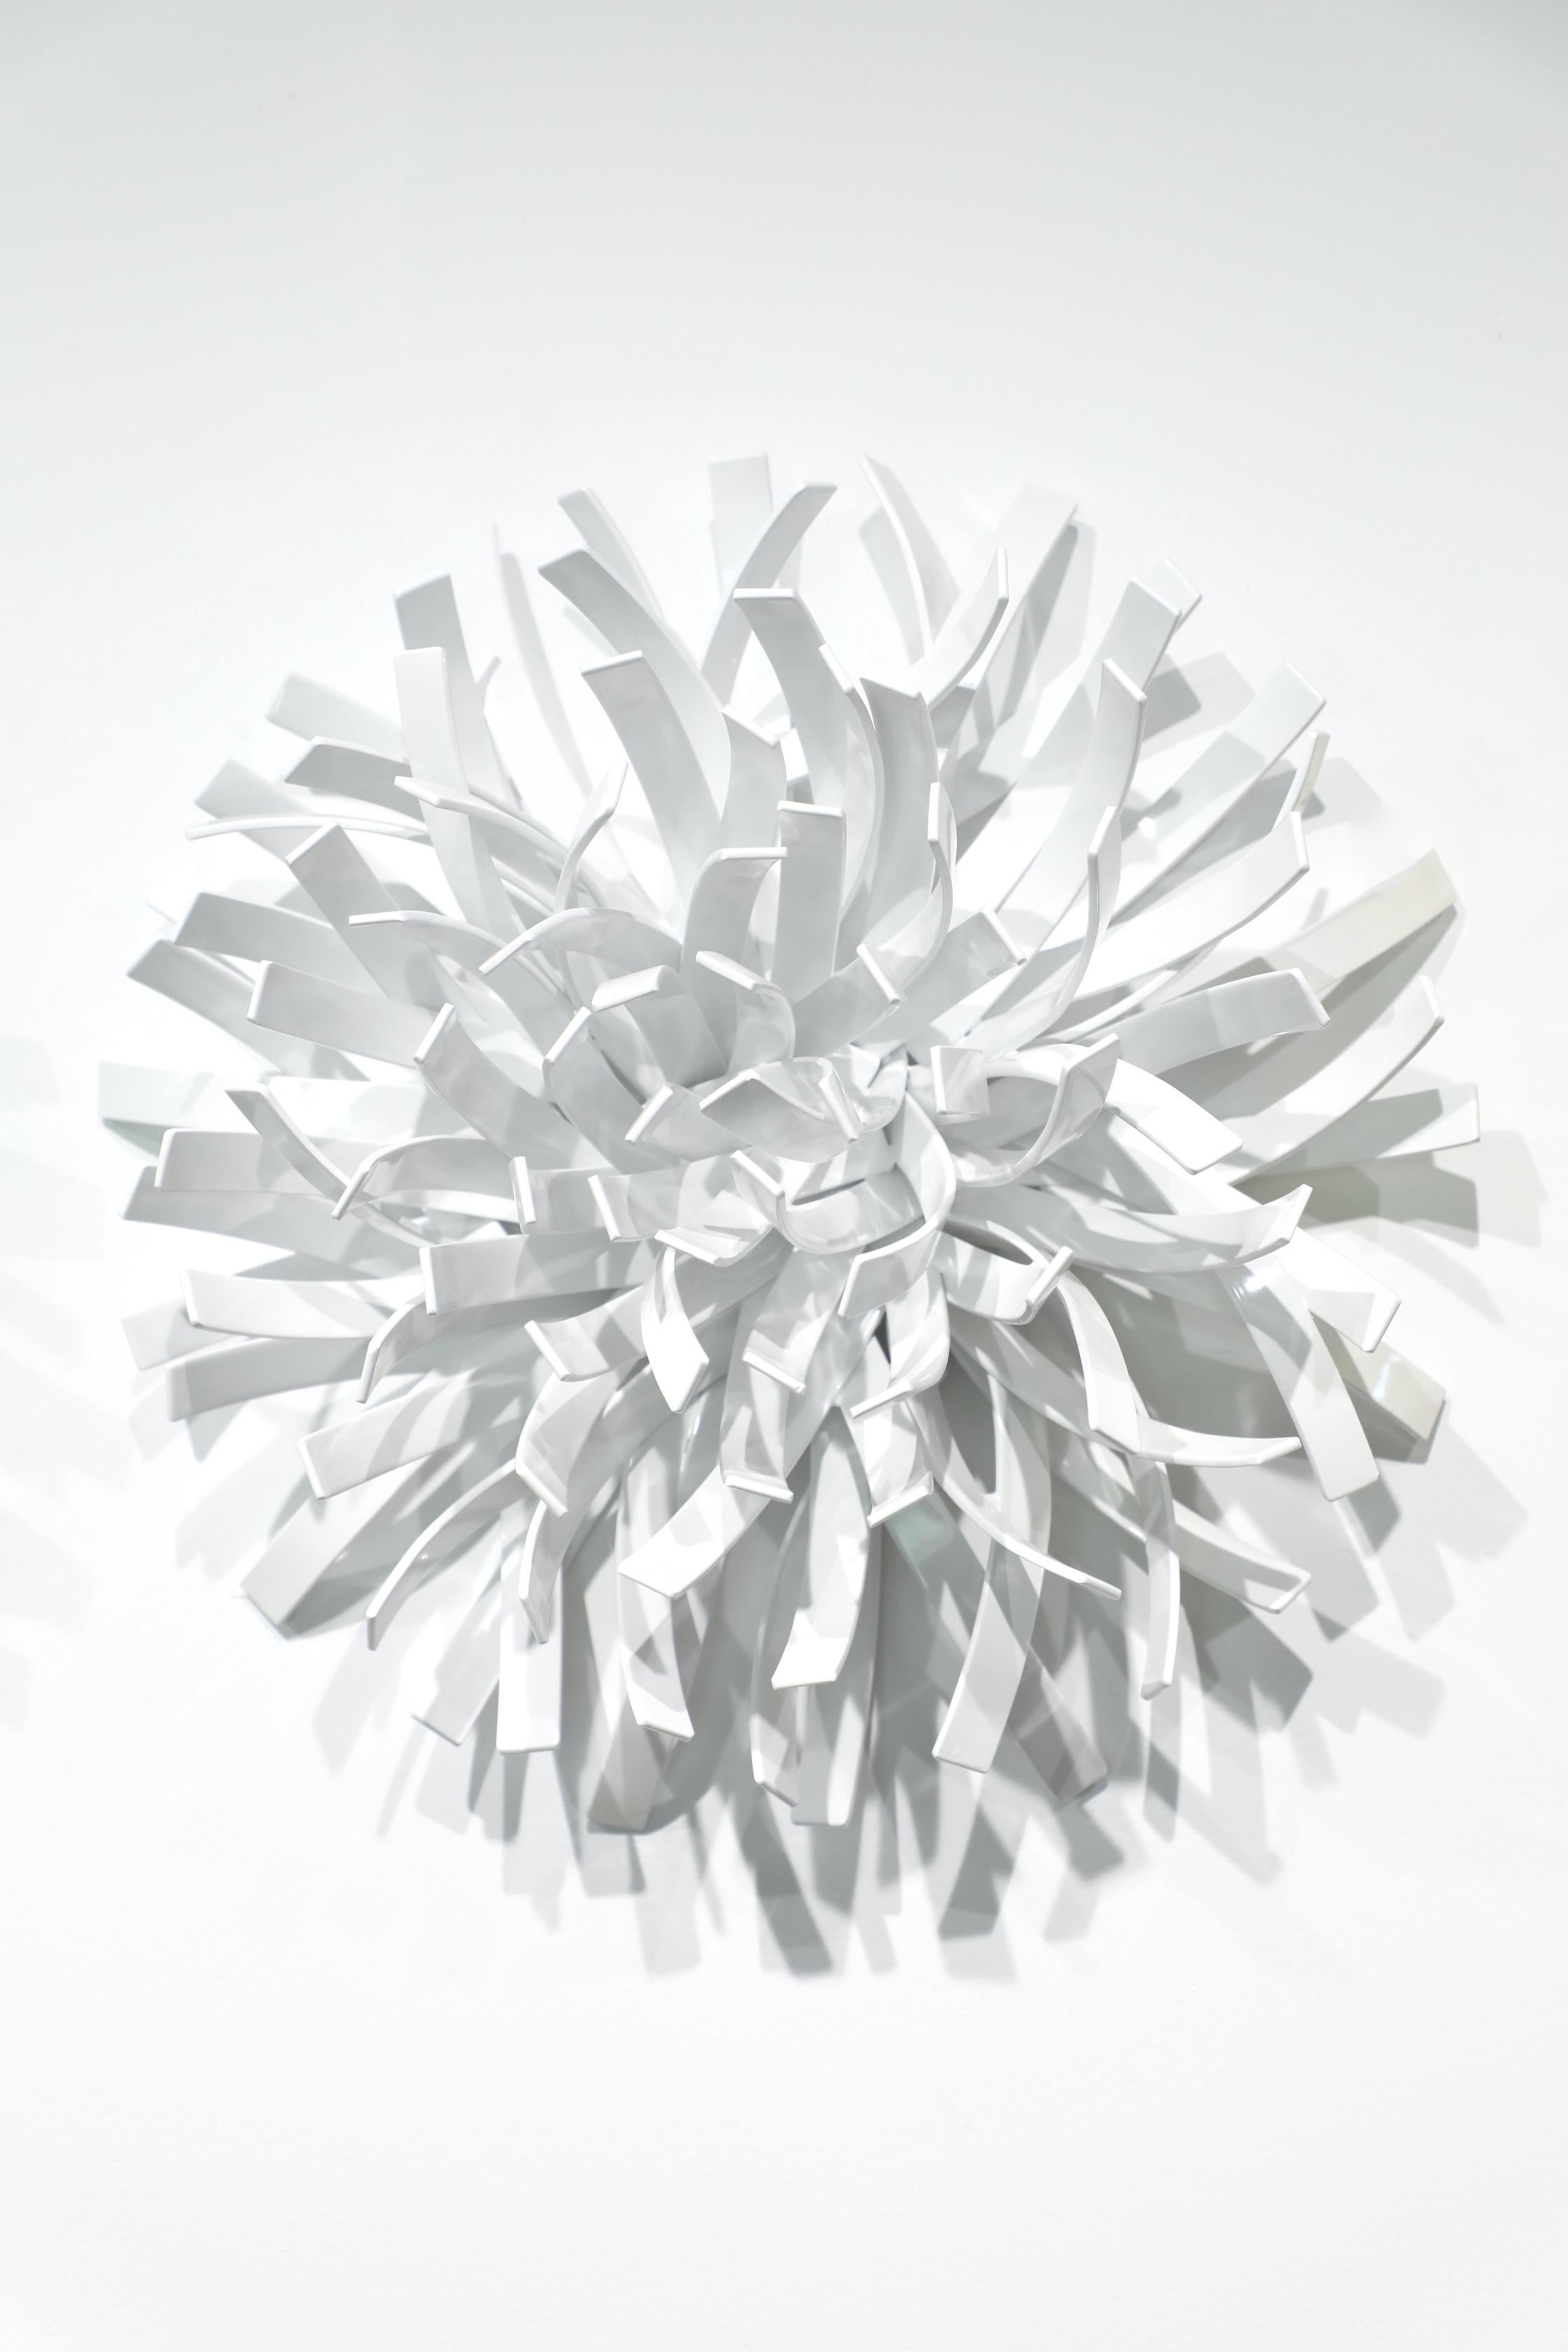 MATT DEVINE
"Anemones #3 (White)"
Steel with Powdercoat (Indoor Only)
17 x 17 x 6 in. 
*Can be installed on wall or placed on table*


Matt Devine is a self-taught sculptor working with steel, aluminum and bronze. Born and raised in Salem,